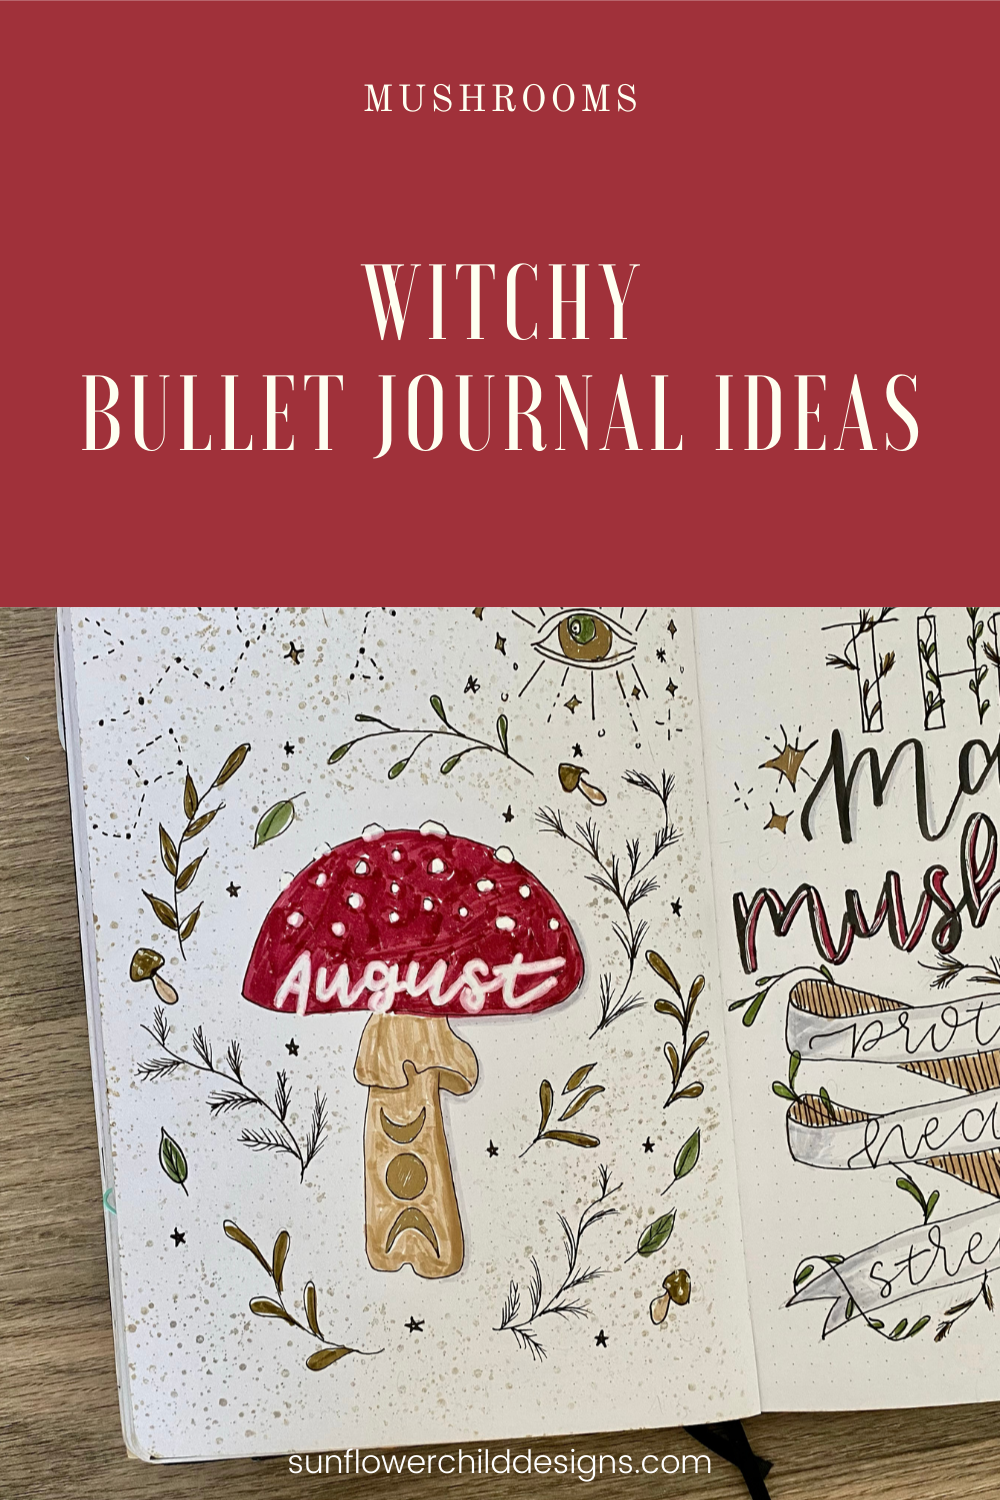 witchy-bullet-journal-ideas-august-bullet-journal-ideas 9.png